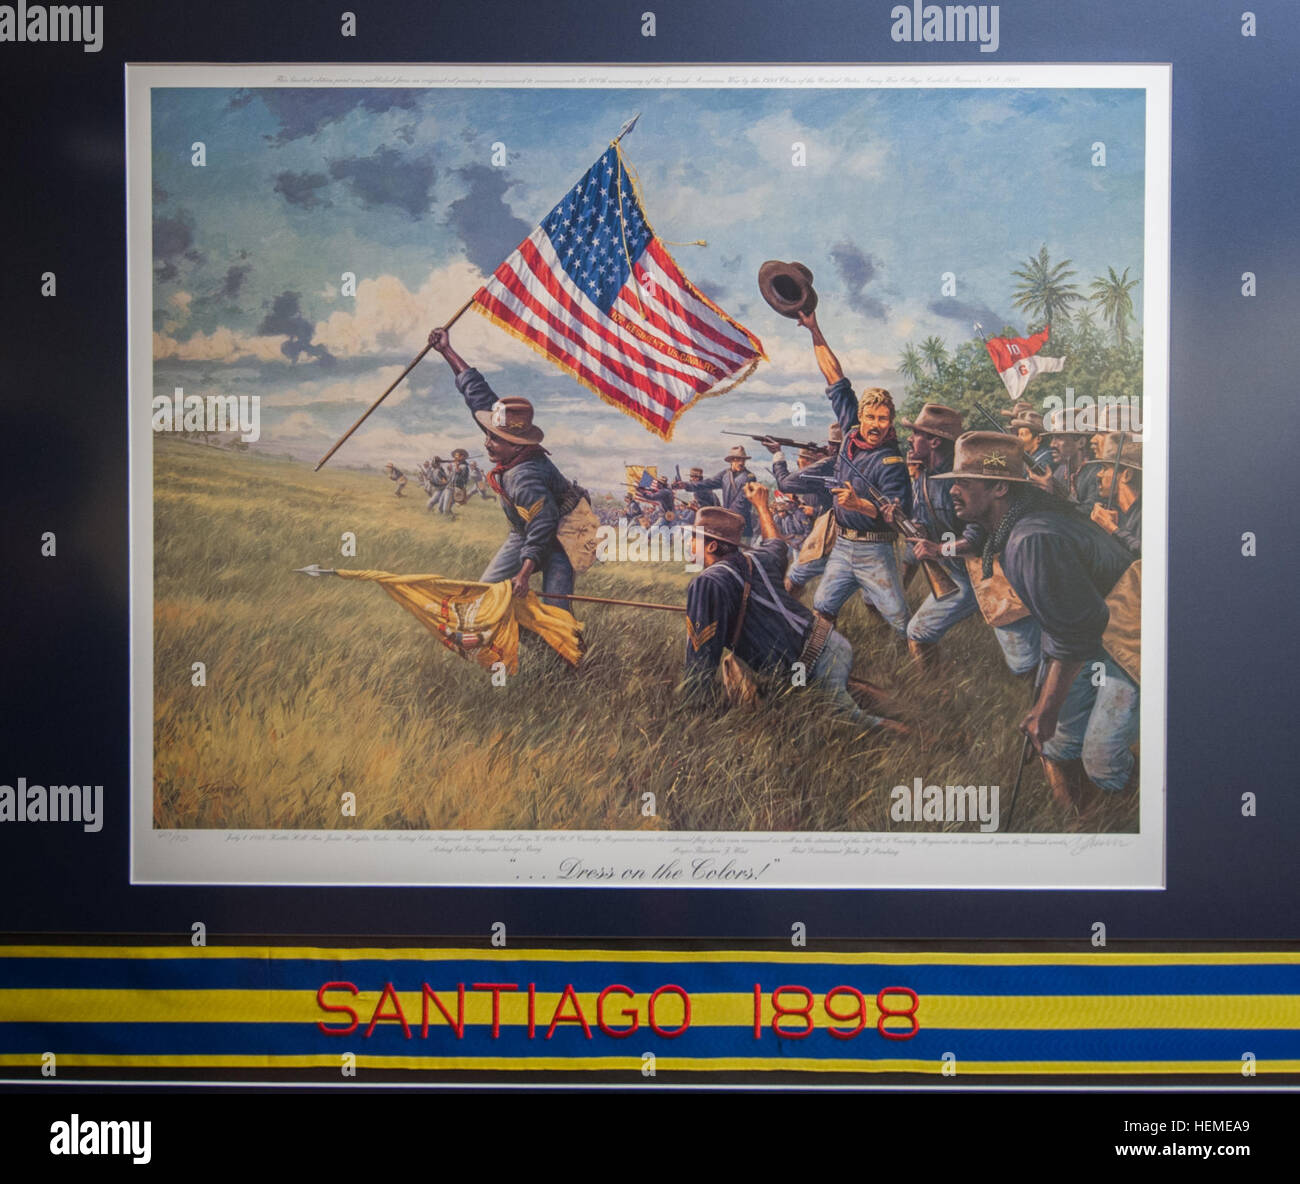 Buffalo Soldier prints, by famed historical artist Dale Gallon, hang in the U.S. Army Reserve Command Headquarters on Fort Bragg, N.C., Feb. 12, 2013. The prints, located on the first floor near the USARC G-4, are in commemoration of Black History month.  In this painting, acting Color Sergeant George Berry of Troop G, 10th U.S. Cavalry Regiment, carries the national flag of his own command as well as the standard of the 3rd U.S. Cavalry Regiment in the assault upon the Spanish works on Kettle Hill, San Juan Heights, Cuba, July 1, 1898. Buffalo soldiers highlighted in USARC display 130212-A-XN Stock Photo